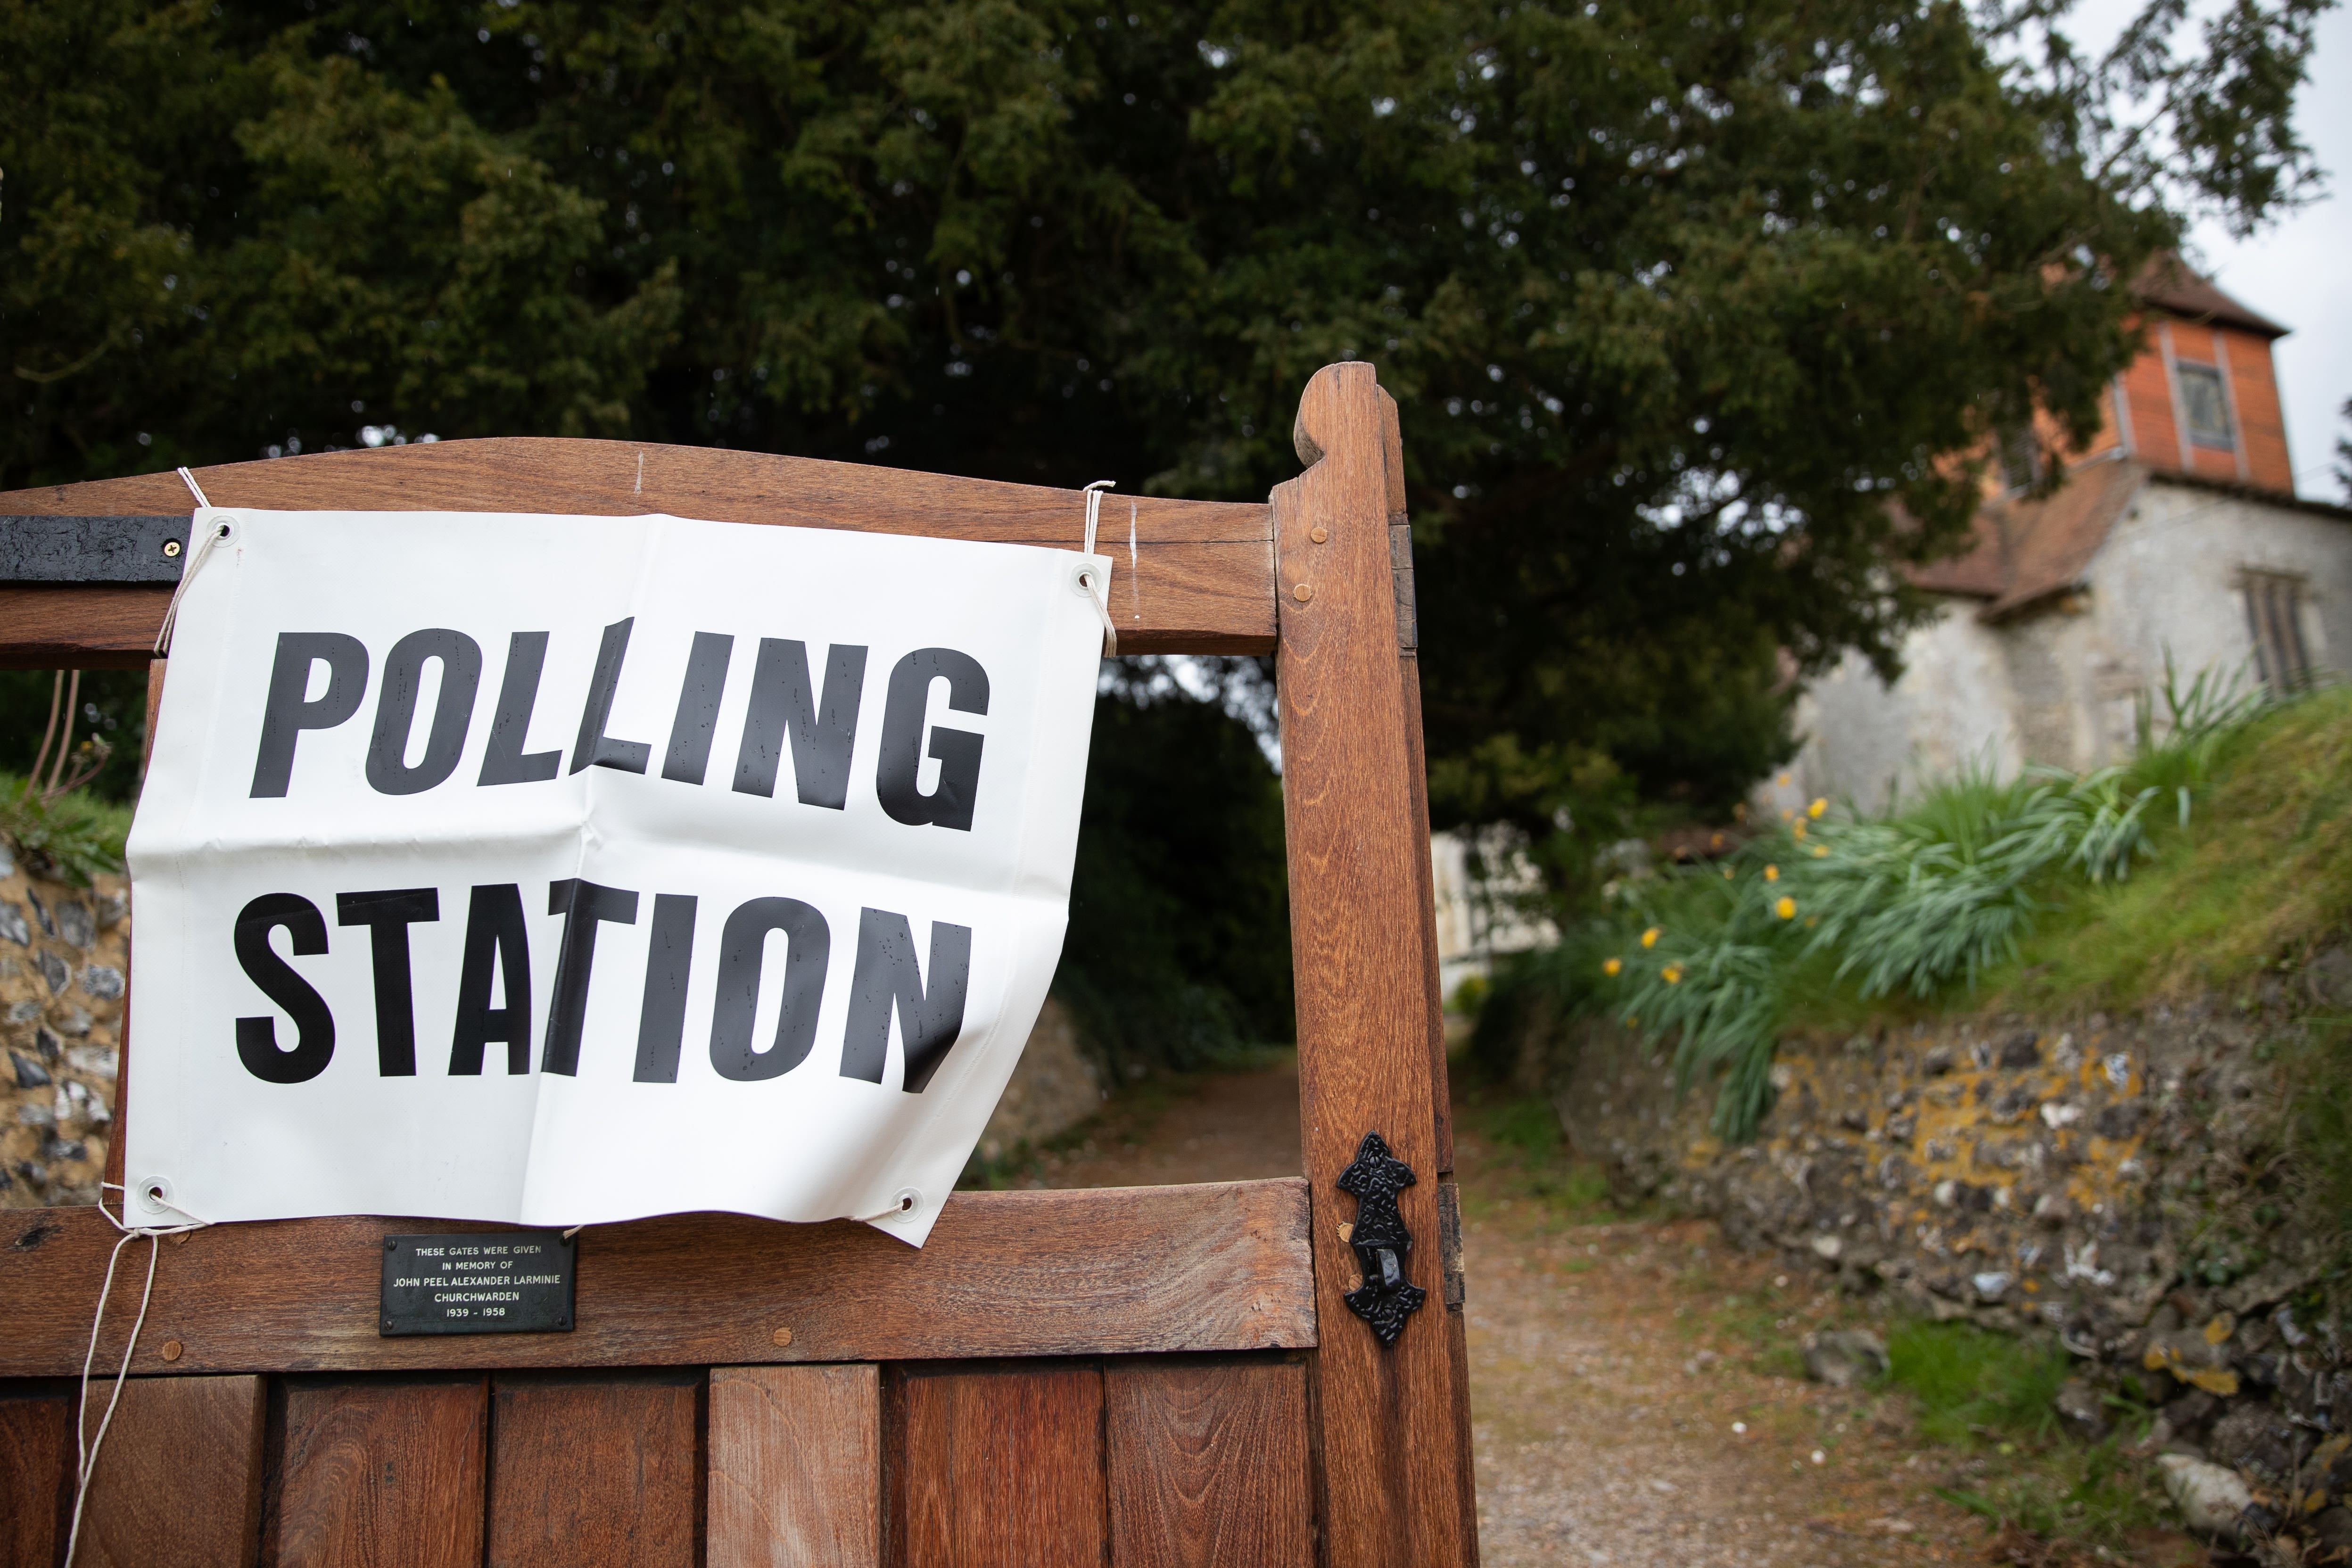 Voters in England have been urged to check they will be able to take part in this year’s local elections (Andrew Matthews/PA)